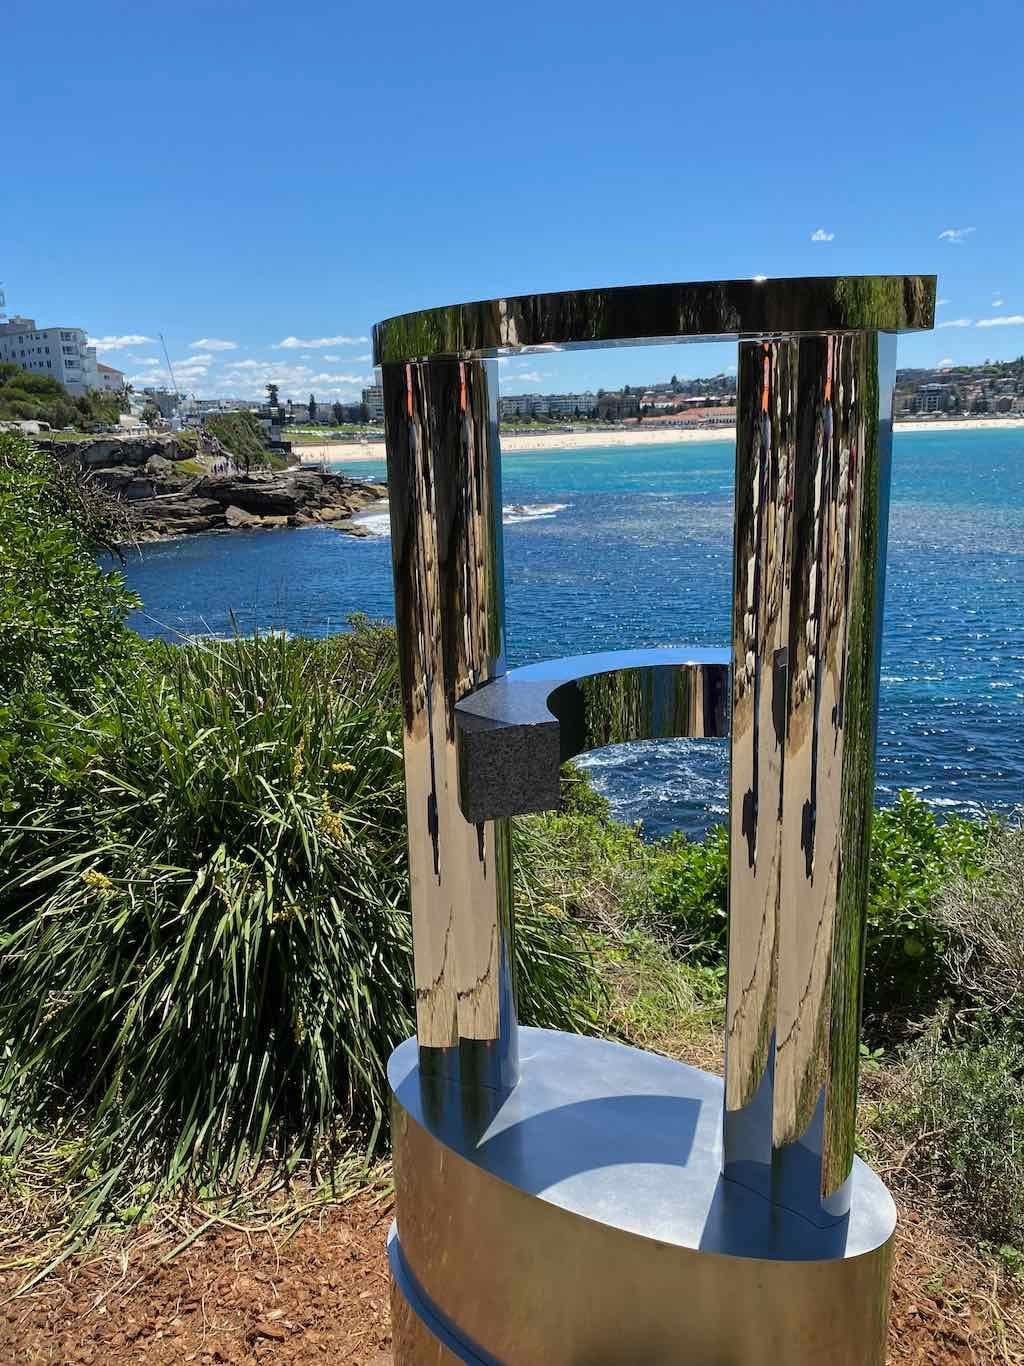 2022 Public Day Tour Sculptures by The Sea Image -6361cfead23aa